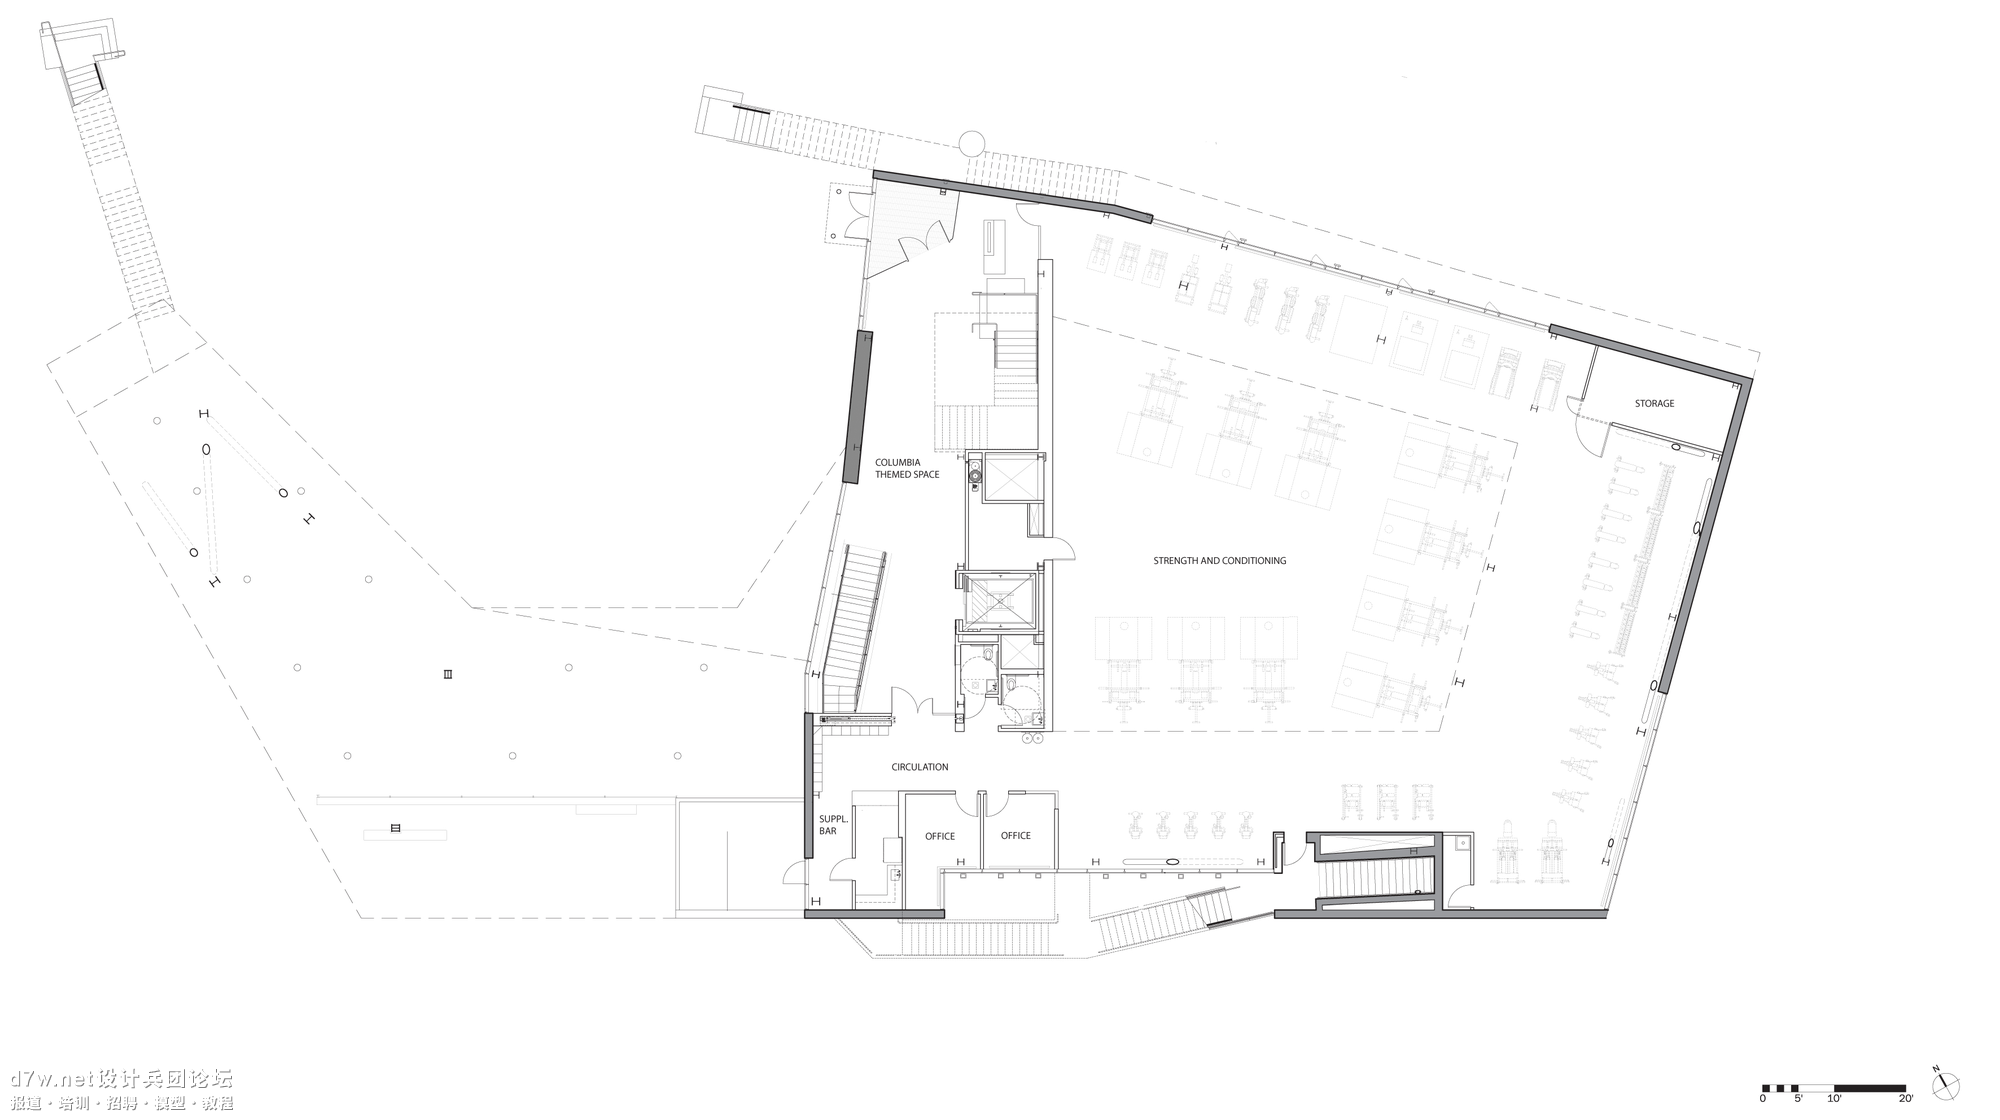 518bcf8ab3fc4ba1bf00001f_campbell-sports-center-steven-holl-architects_floor_02_plan.png